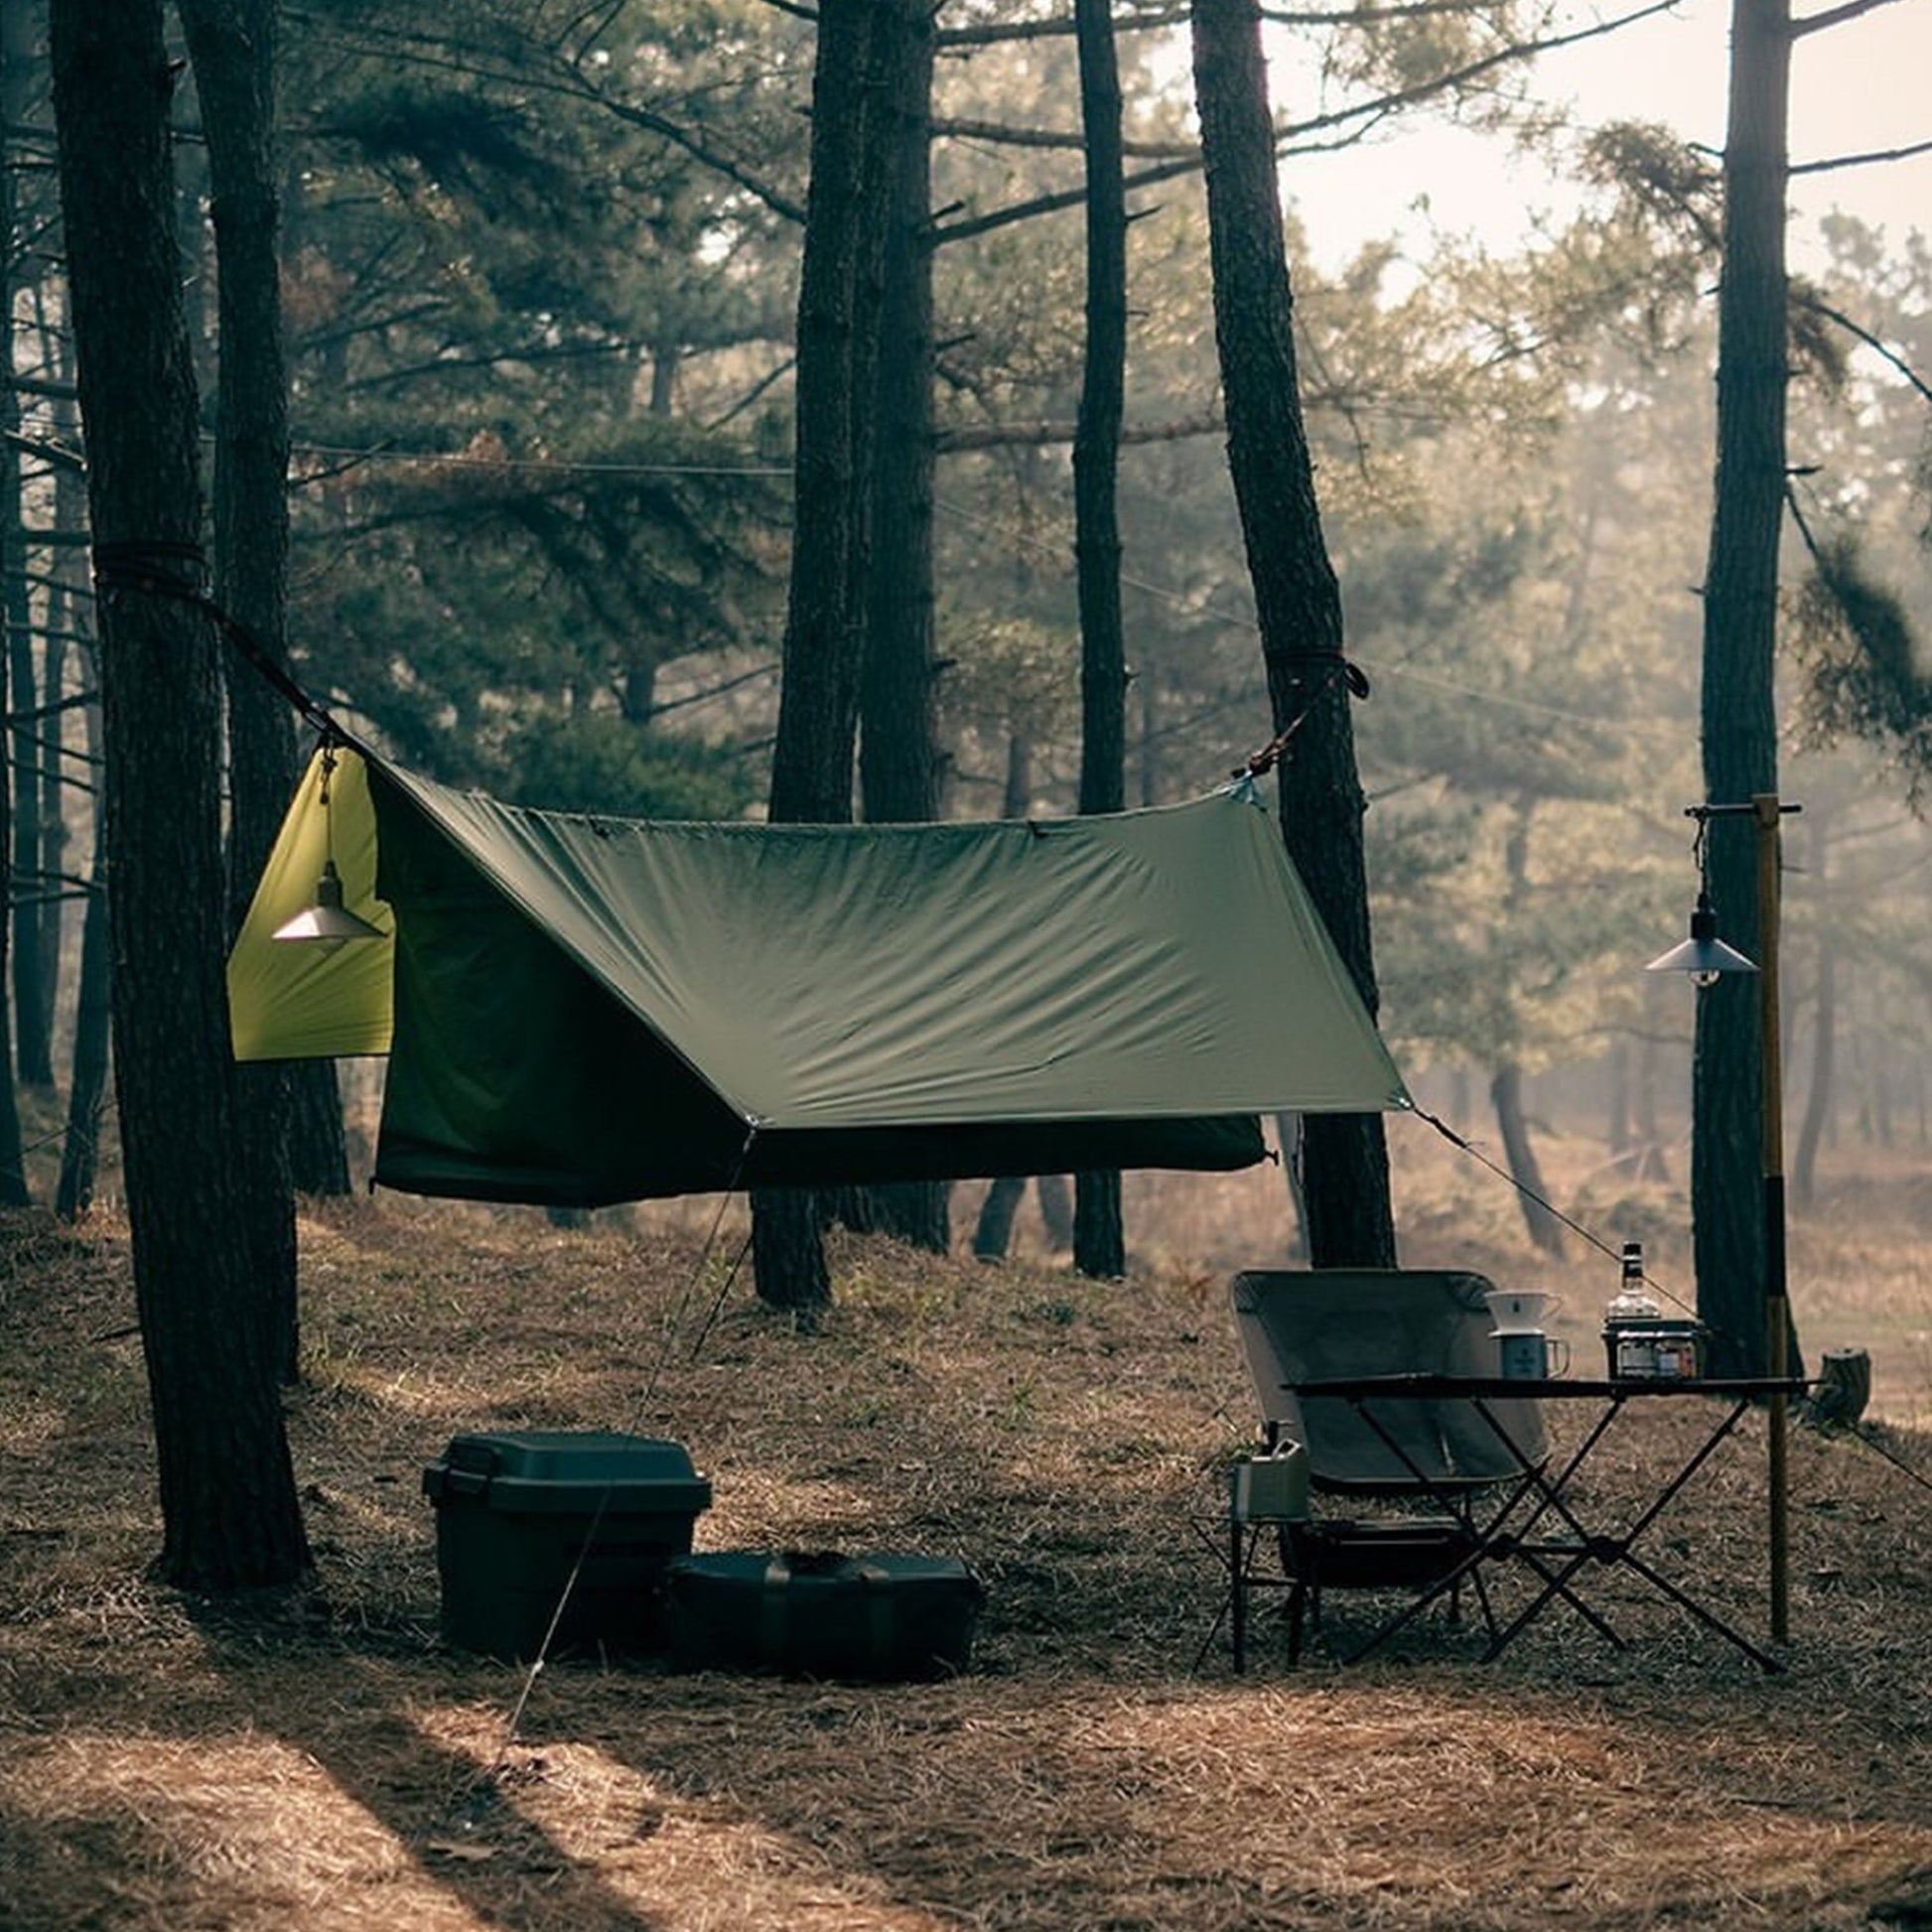 Forest green portable camping hammock between two trees at a campsite